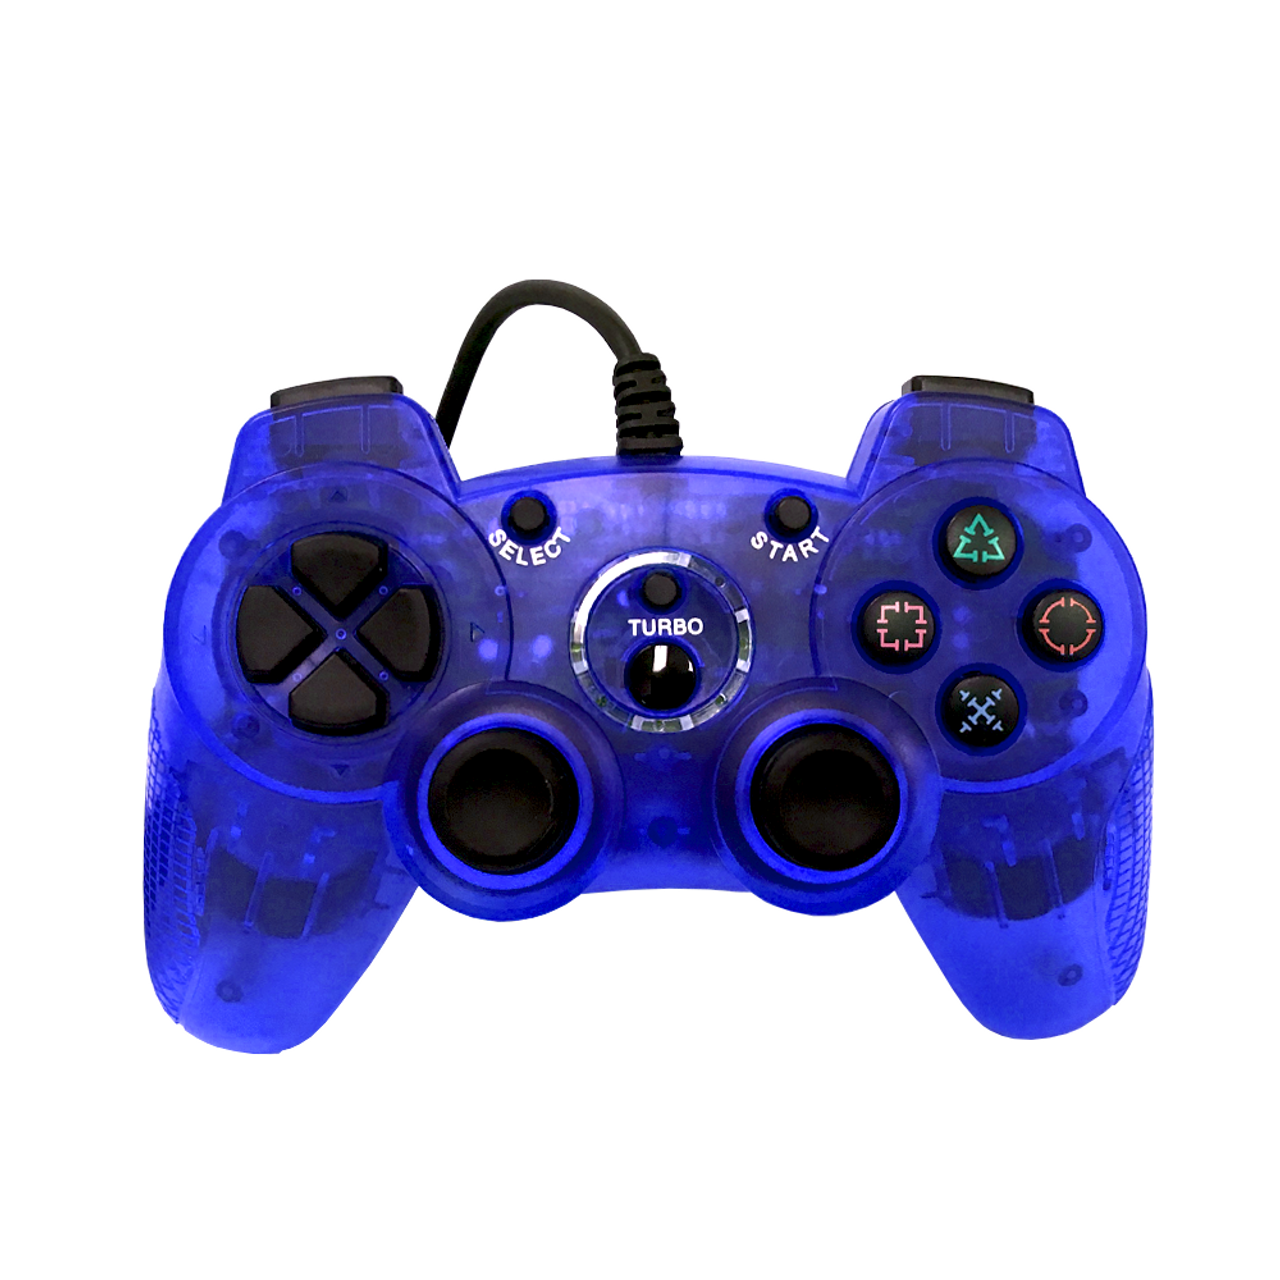 Datum matematiker Mob PlayStation 2 Double-Shock 2 Controller - Blue for PlayStation 2 available  at Videogamesnewyork, NY